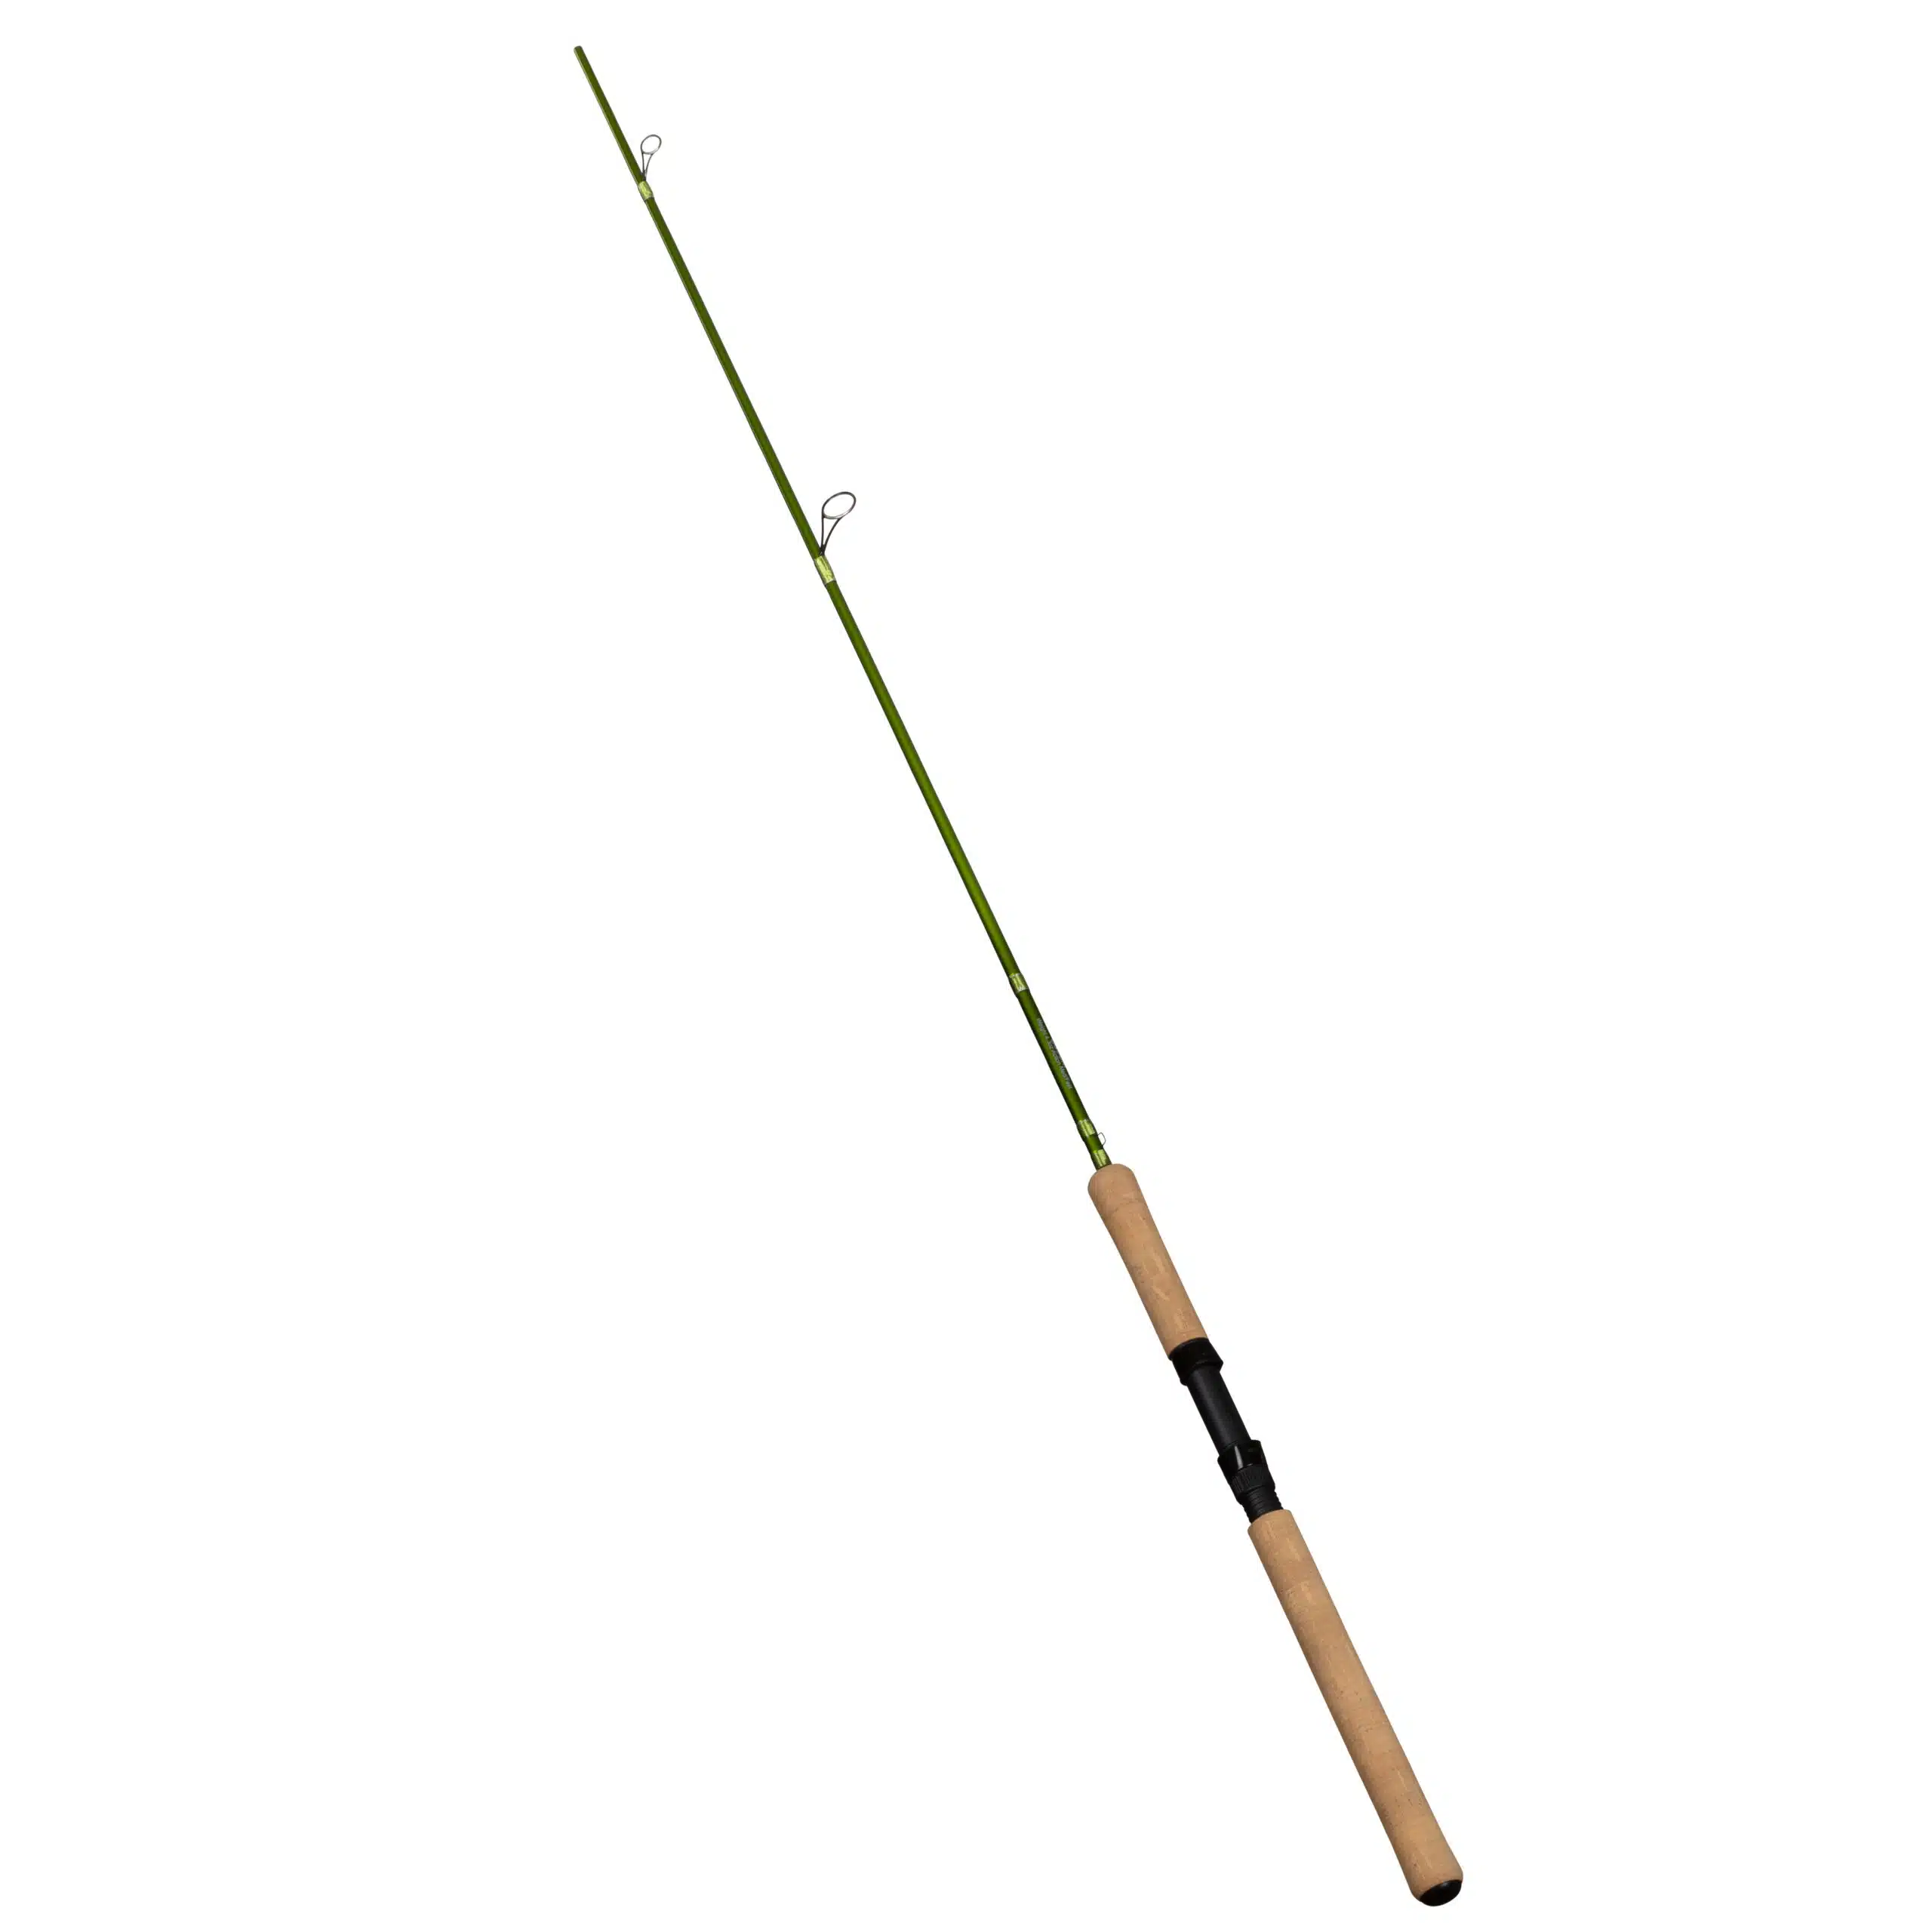 5 Weight 8'6 Fiberglass Rod and Reel Package